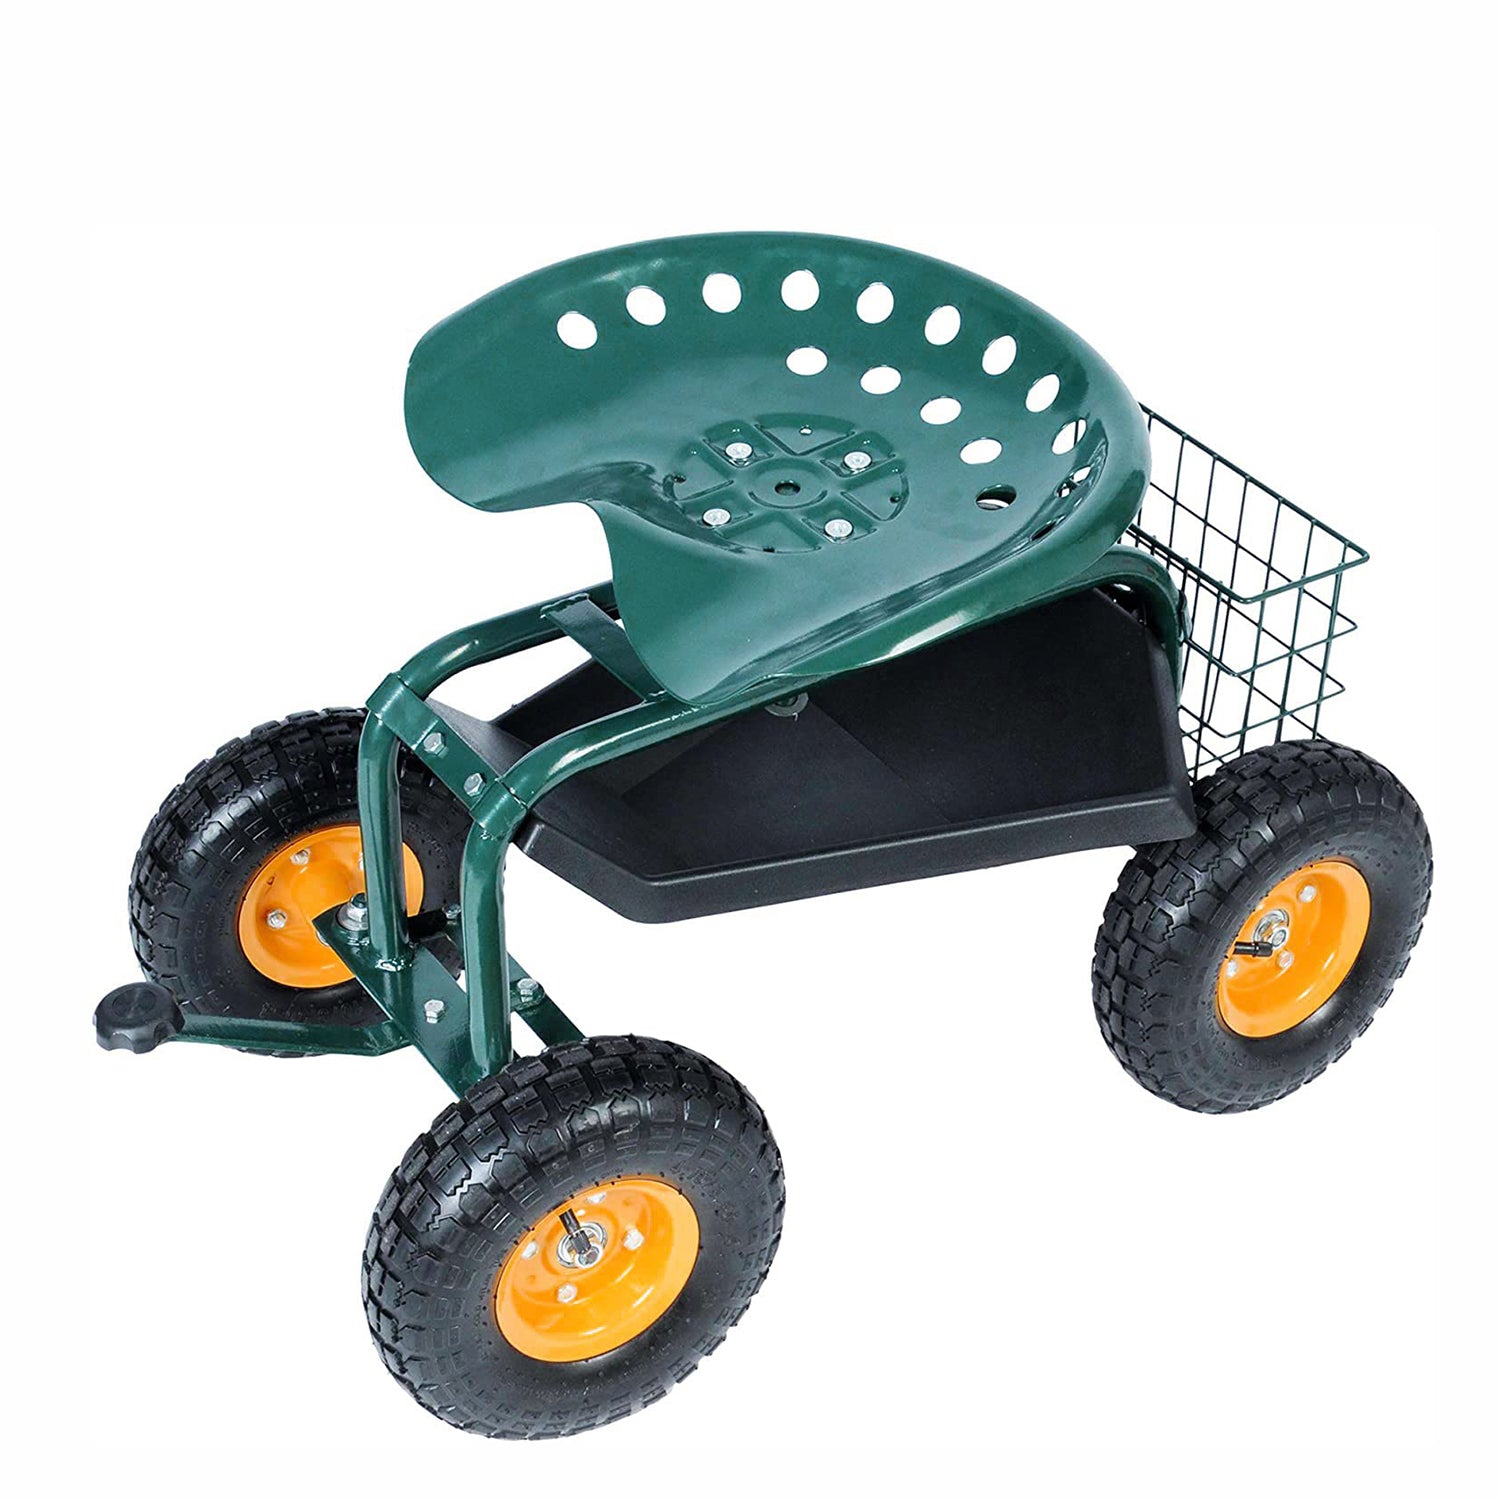 Rolling Garden Cart with Seat Lawn Yard Patio Work Seat Gardening Stool Cart with Tool Tray and Storage Basket